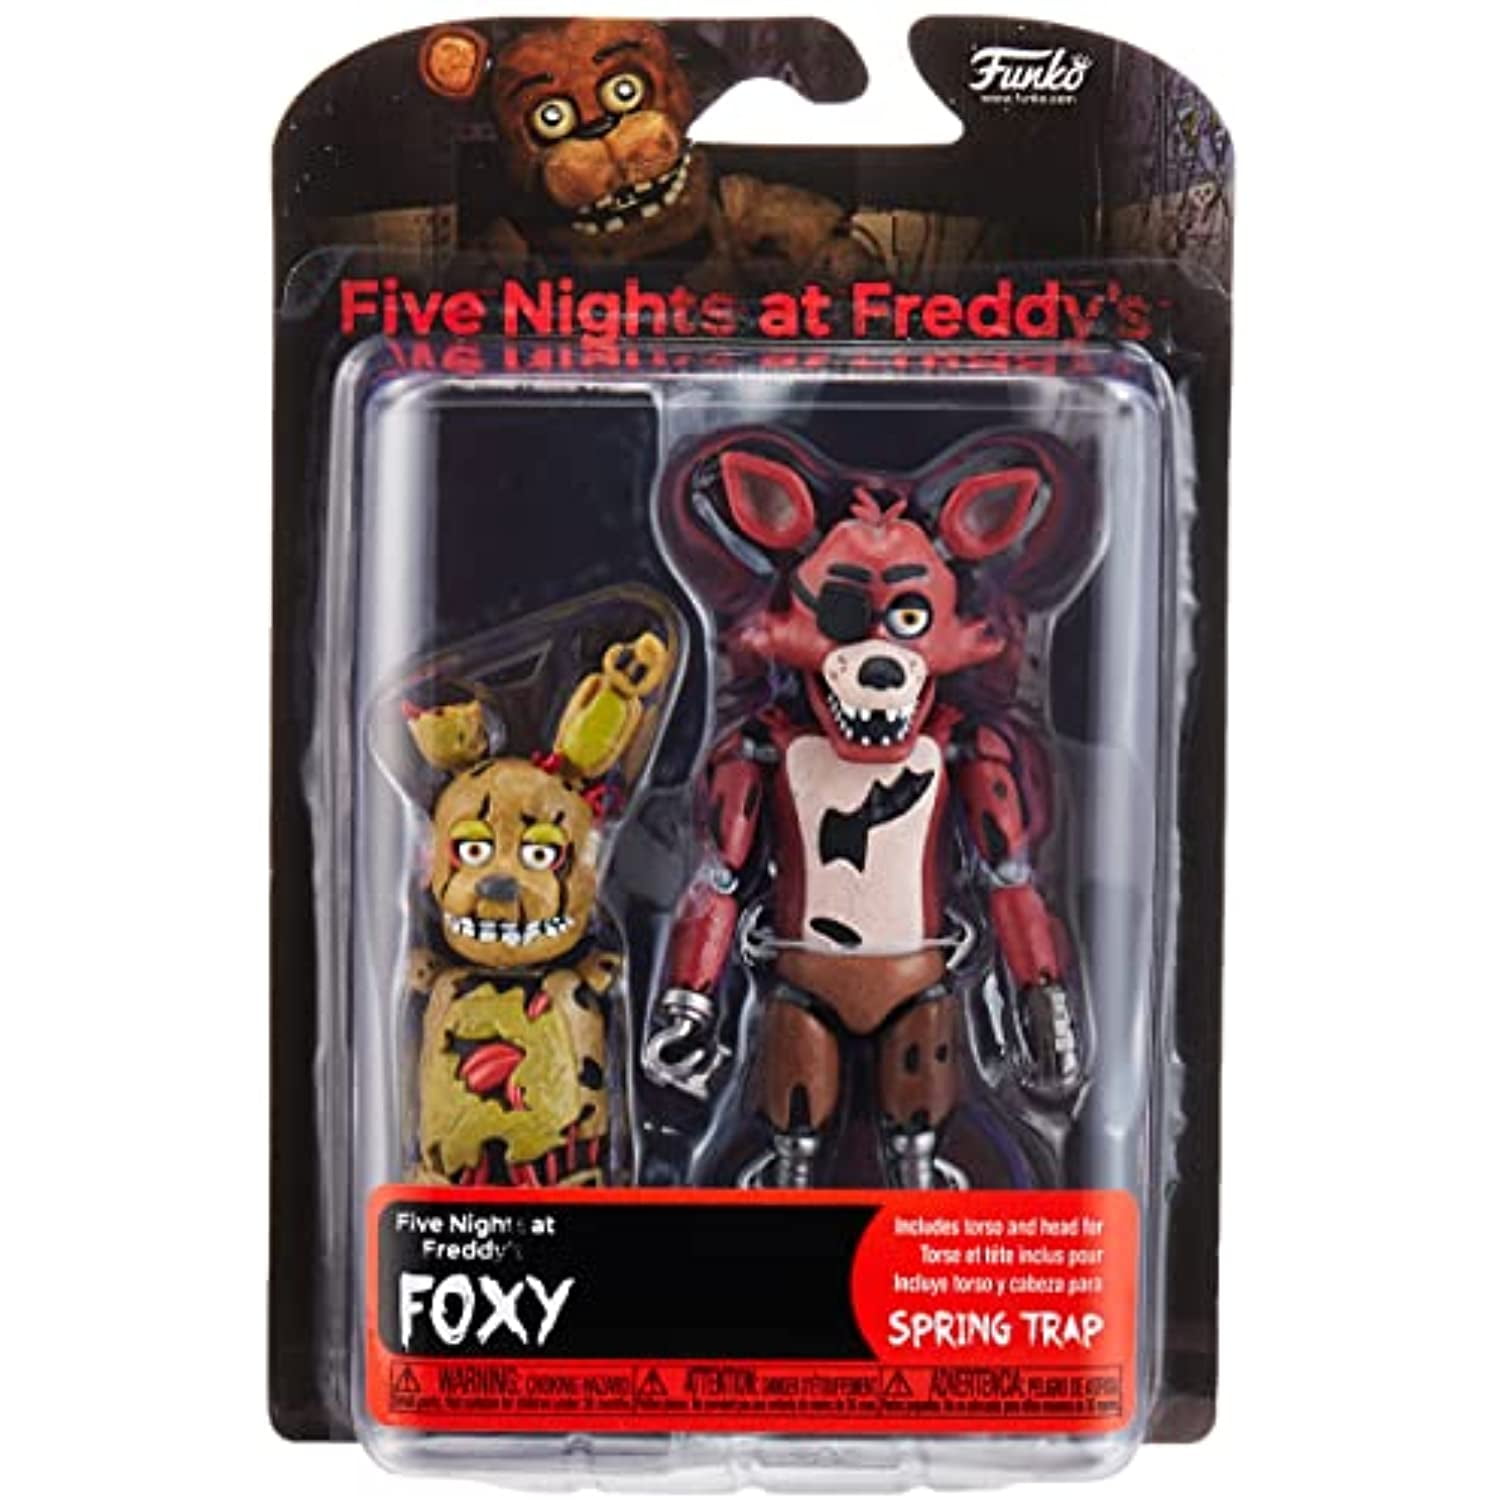 MakeCool - (Green Foxy) Golden Freddy Foxy The Pirate Articulated